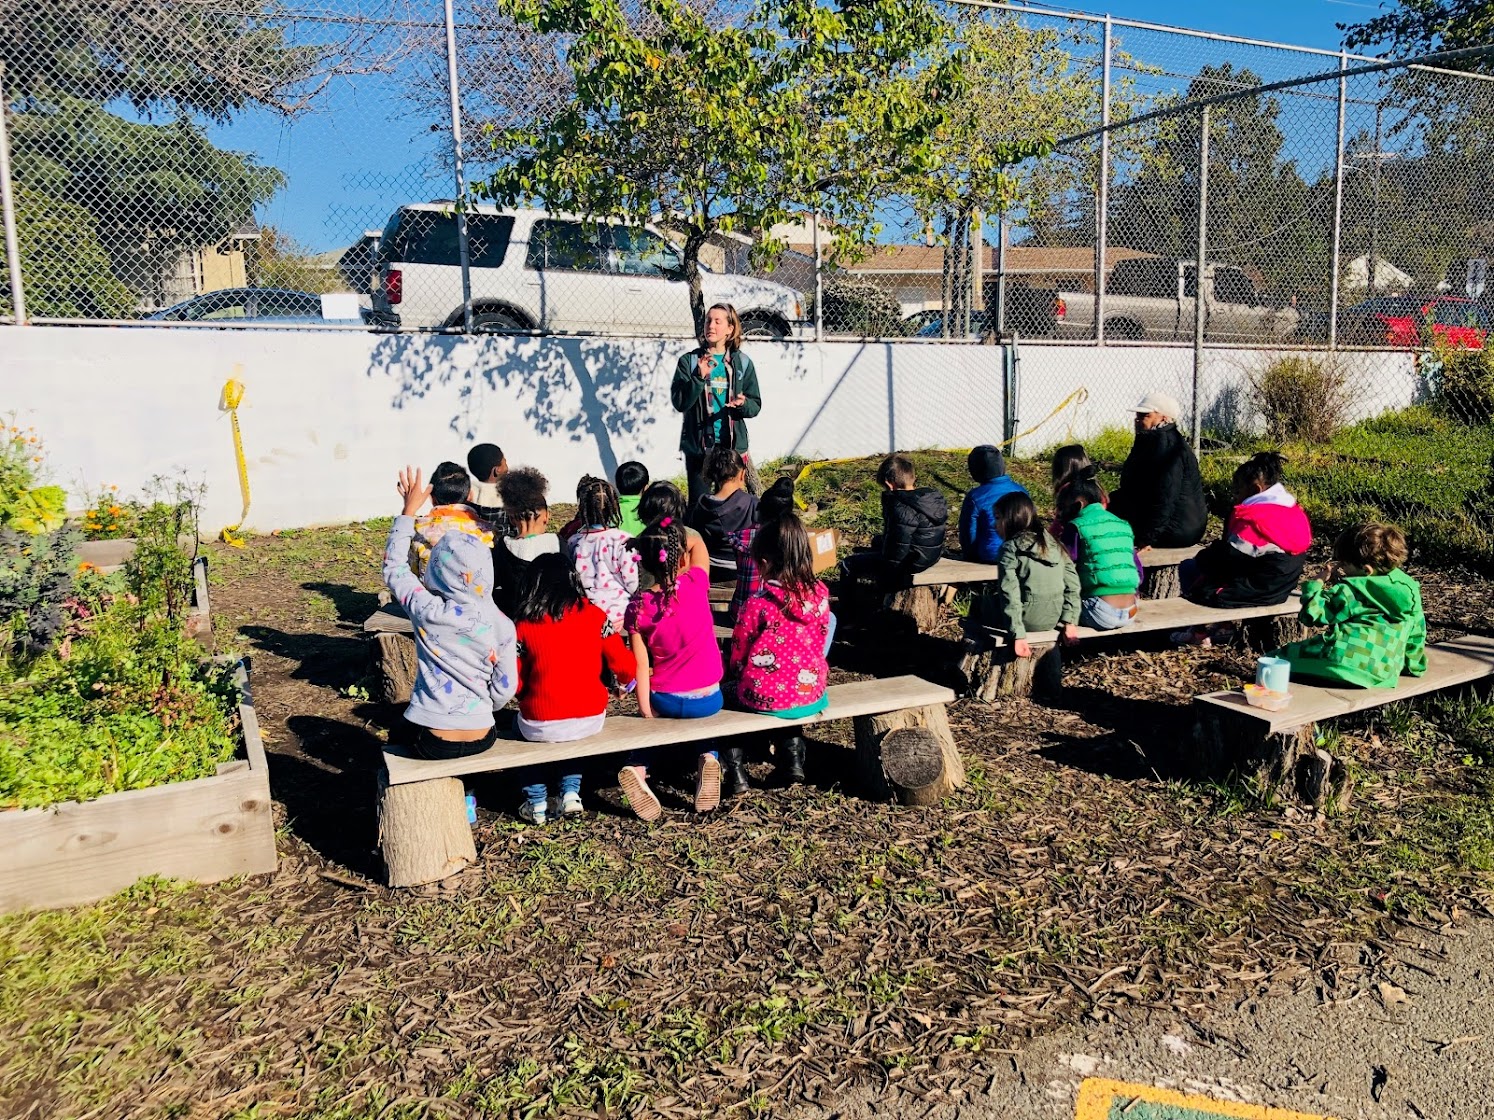 Prior to managing and implementing district-wide school meal programs in Oakland, Scout worked closely with students in school gardens and cafeterias! In this photo she stands in front of a class of 5-6 year-olds who are in a school garden of an Oakland neighborhood.